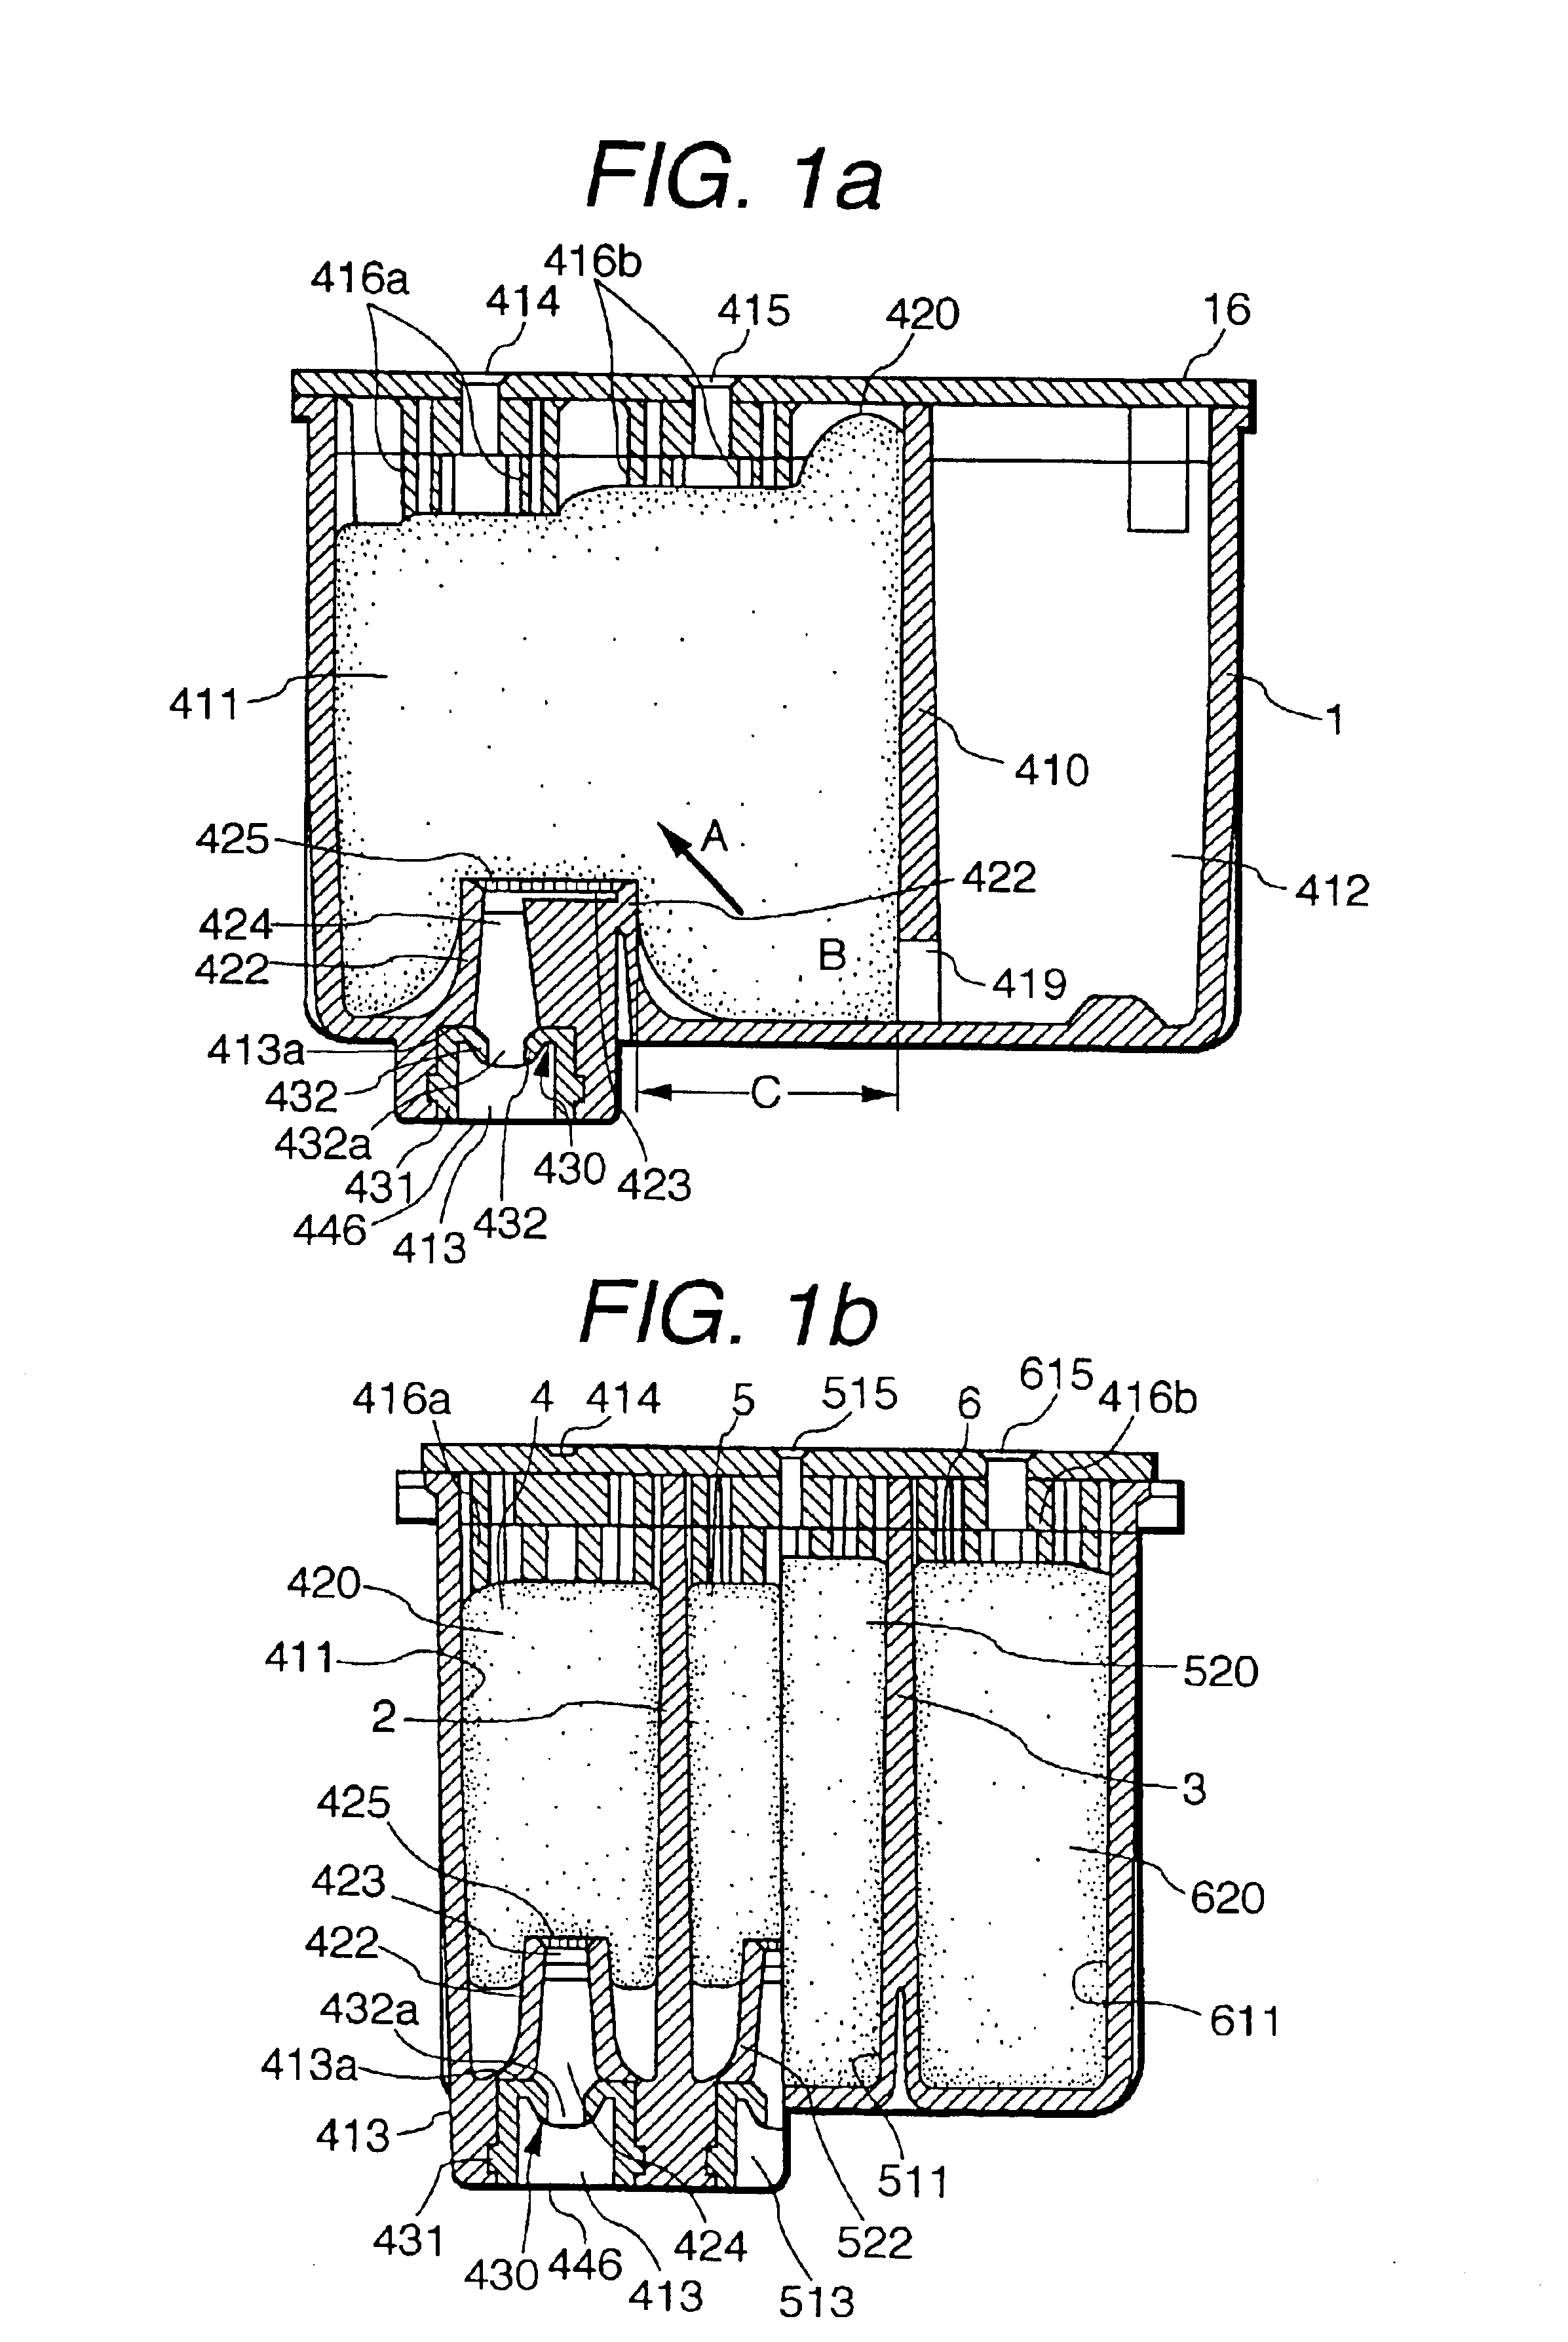 Ink cartridge for ink jet printer and method of charging ink into said cartridge